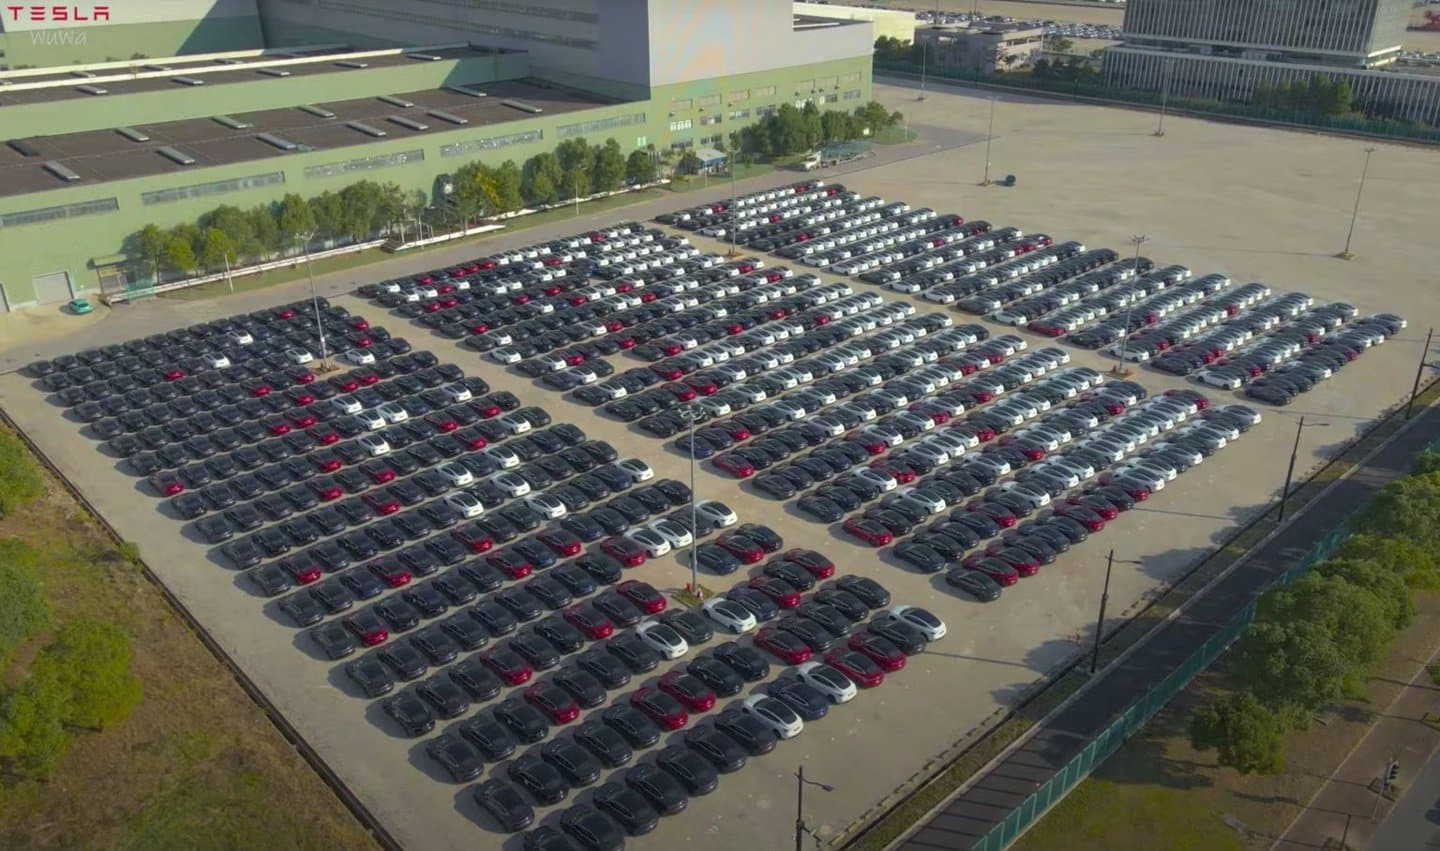 A second batch of thousands of Model 3 Highlands spotted at Shanghai port for export